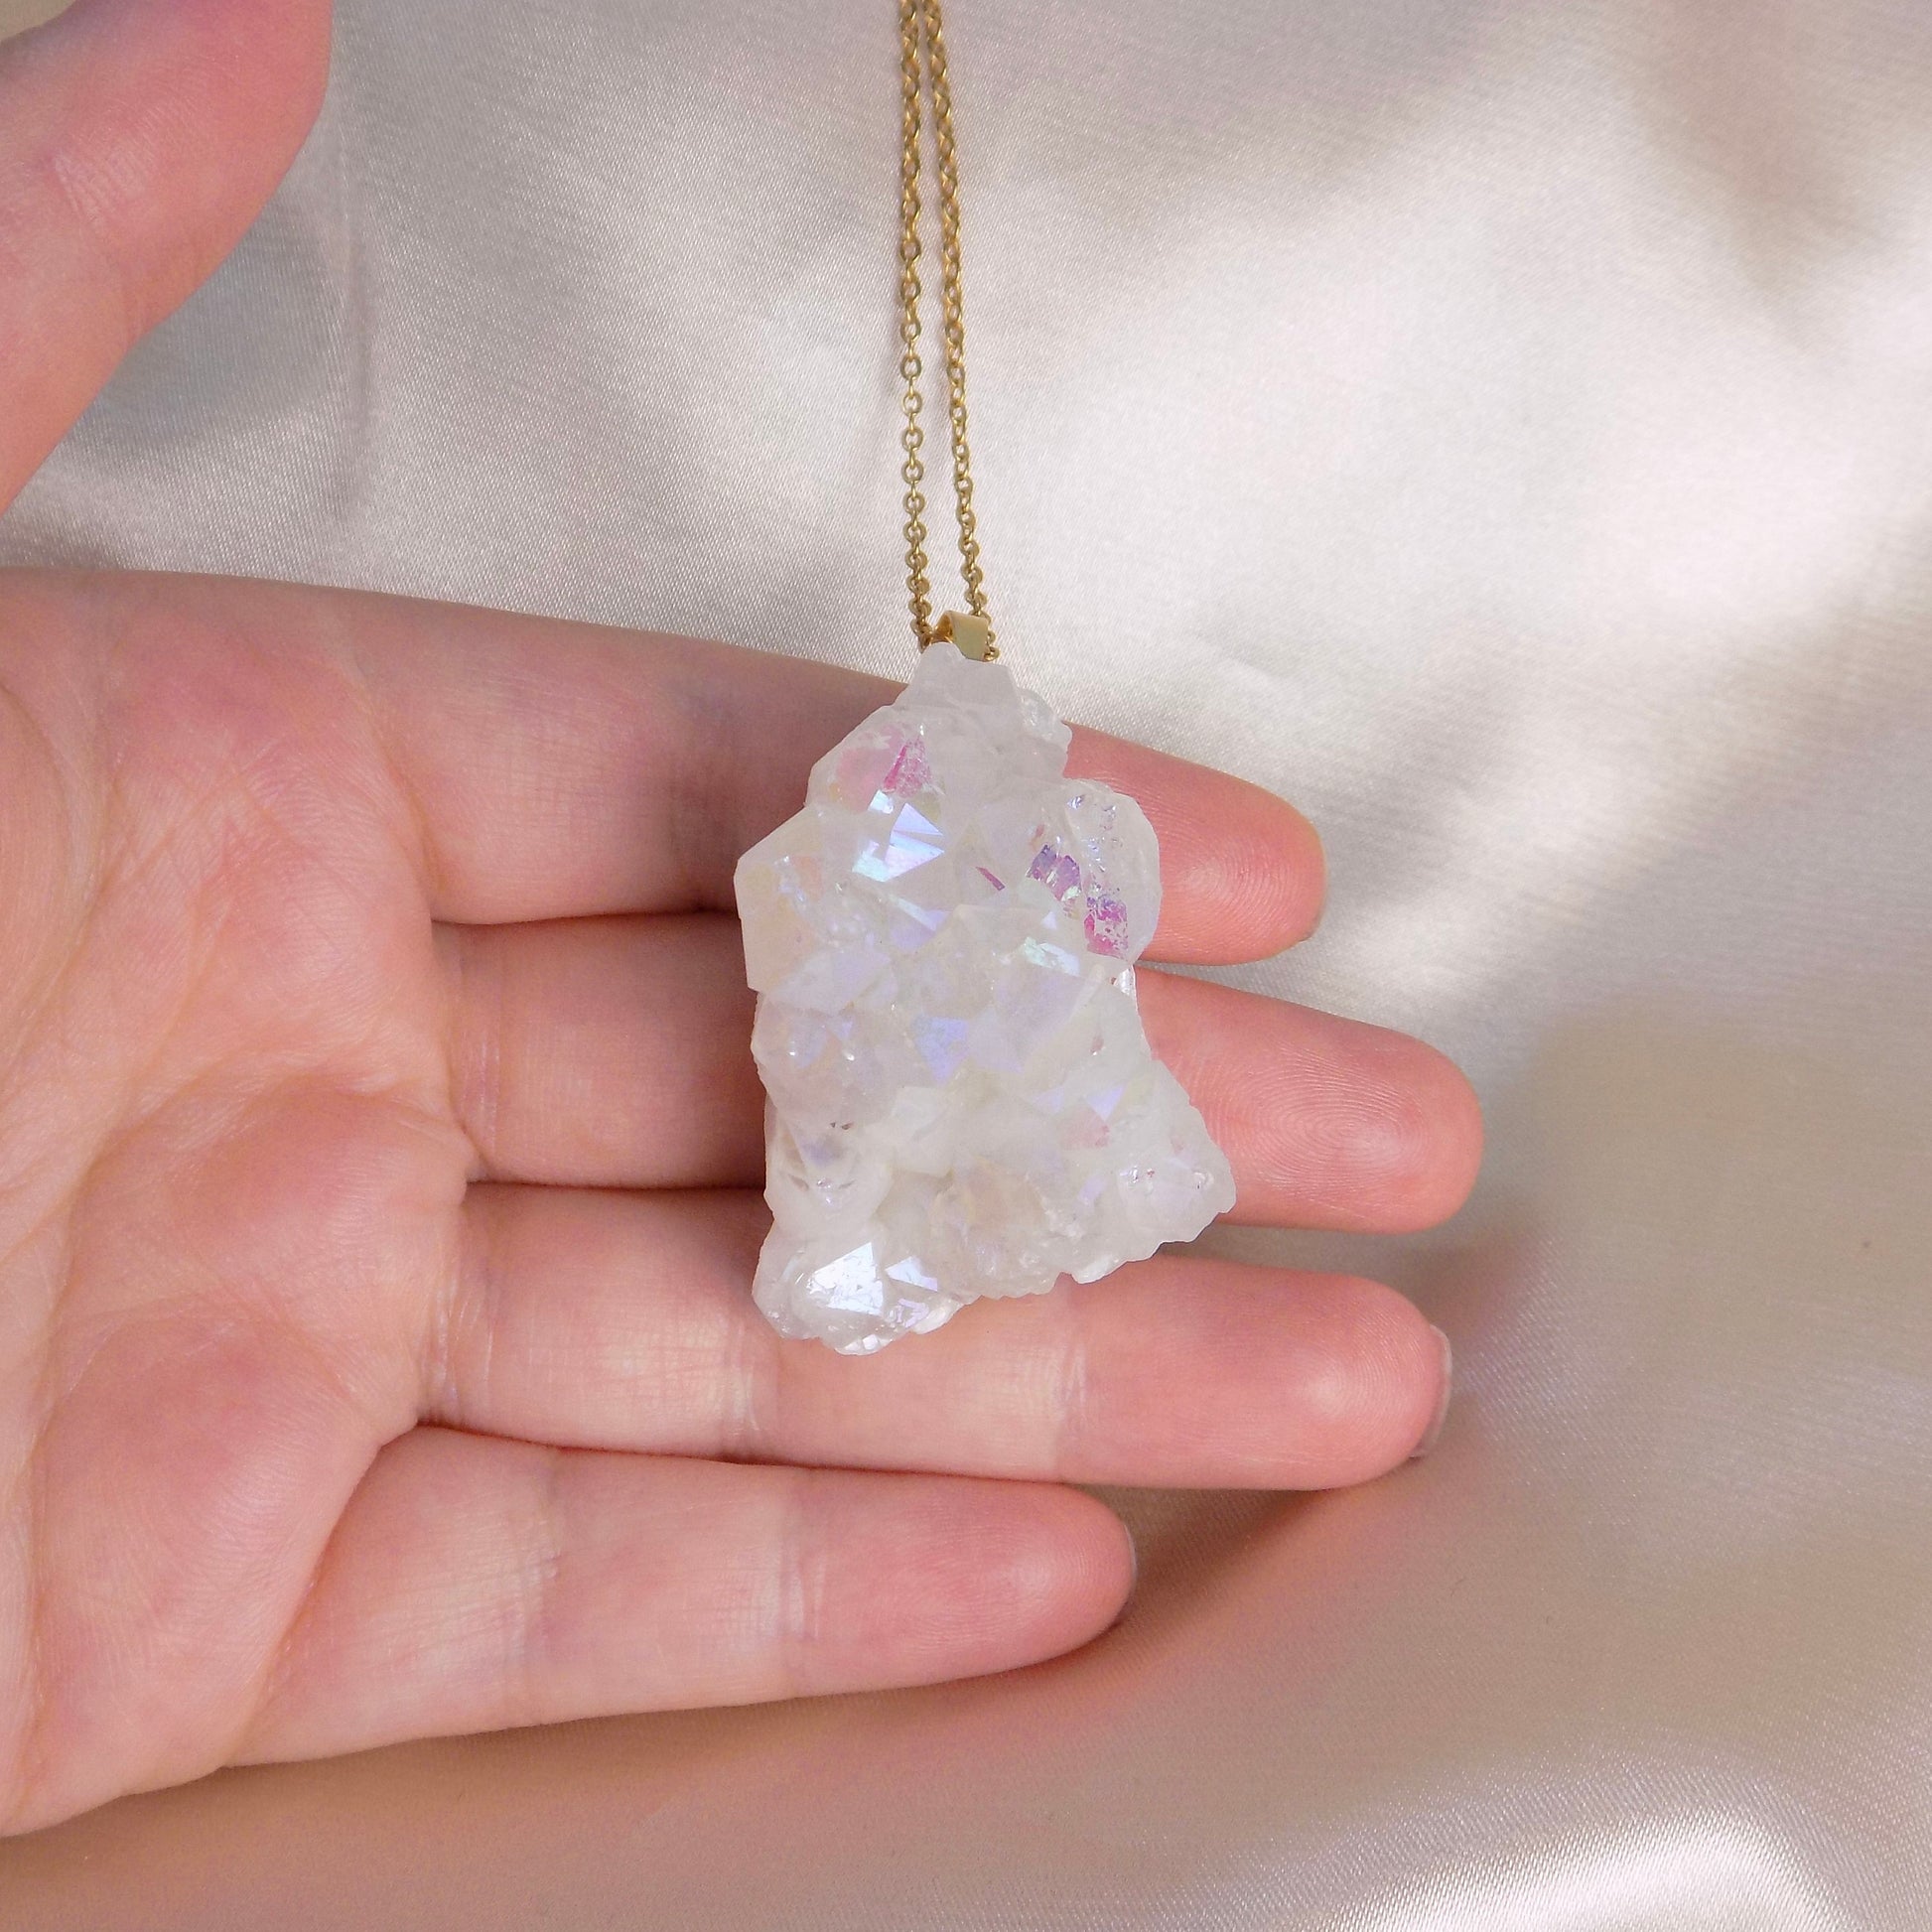 Angel Aura Cluster Necklace, Extra Large Iridescent White Druzy Pendant Necklace Gold, Gift For Mom, M7-46